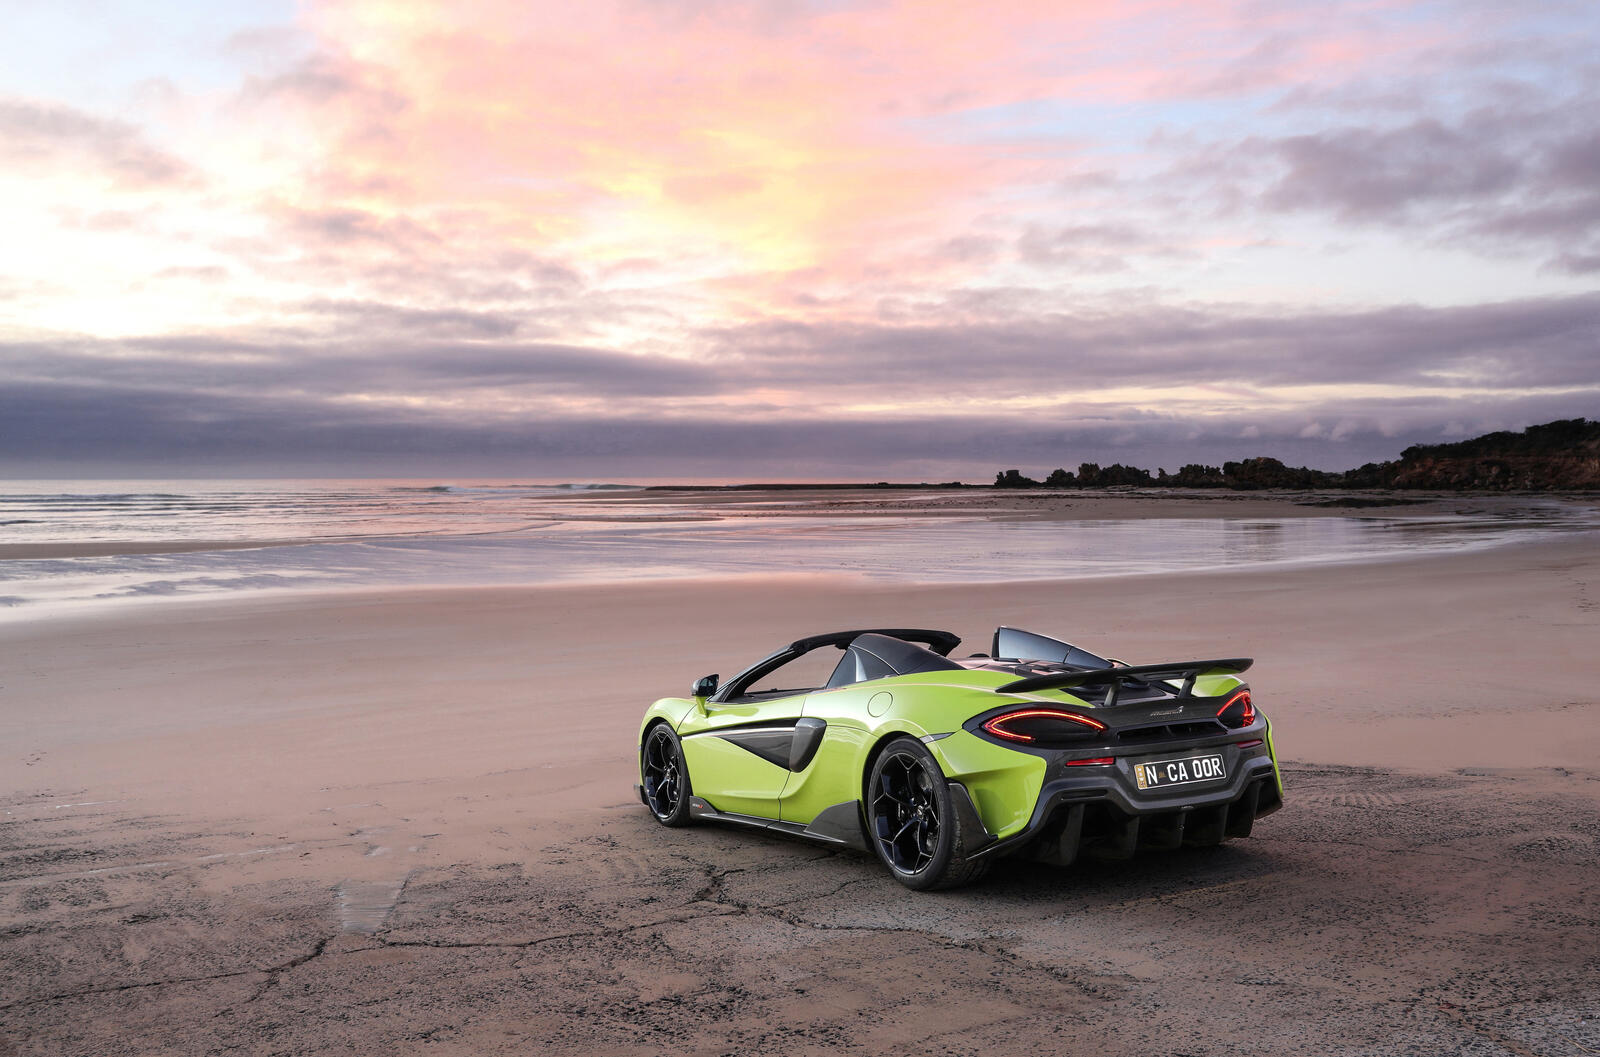 Free photo Mclaren 600lt on the beach with an open top